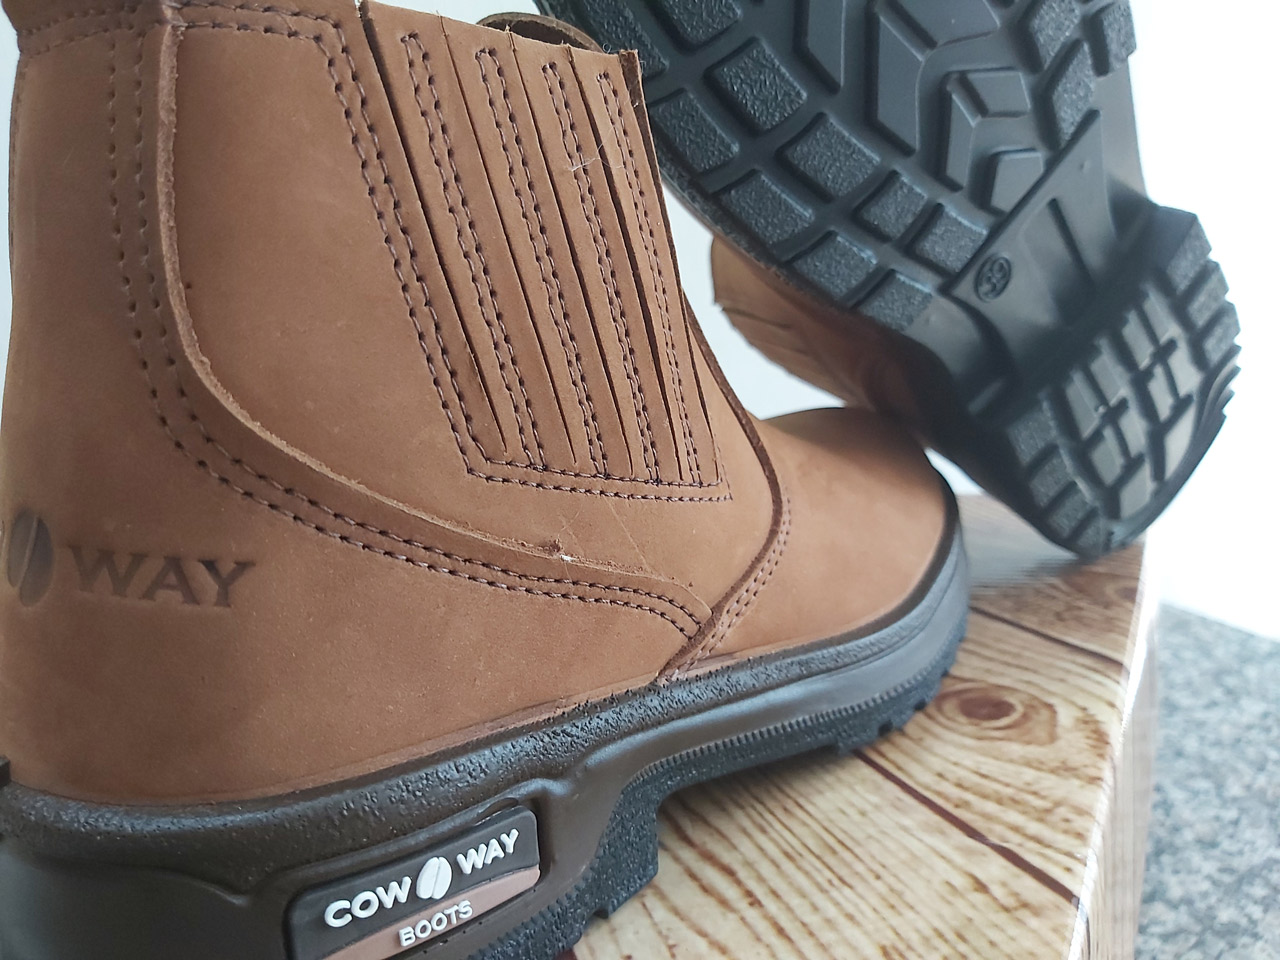 Cow Way Boots